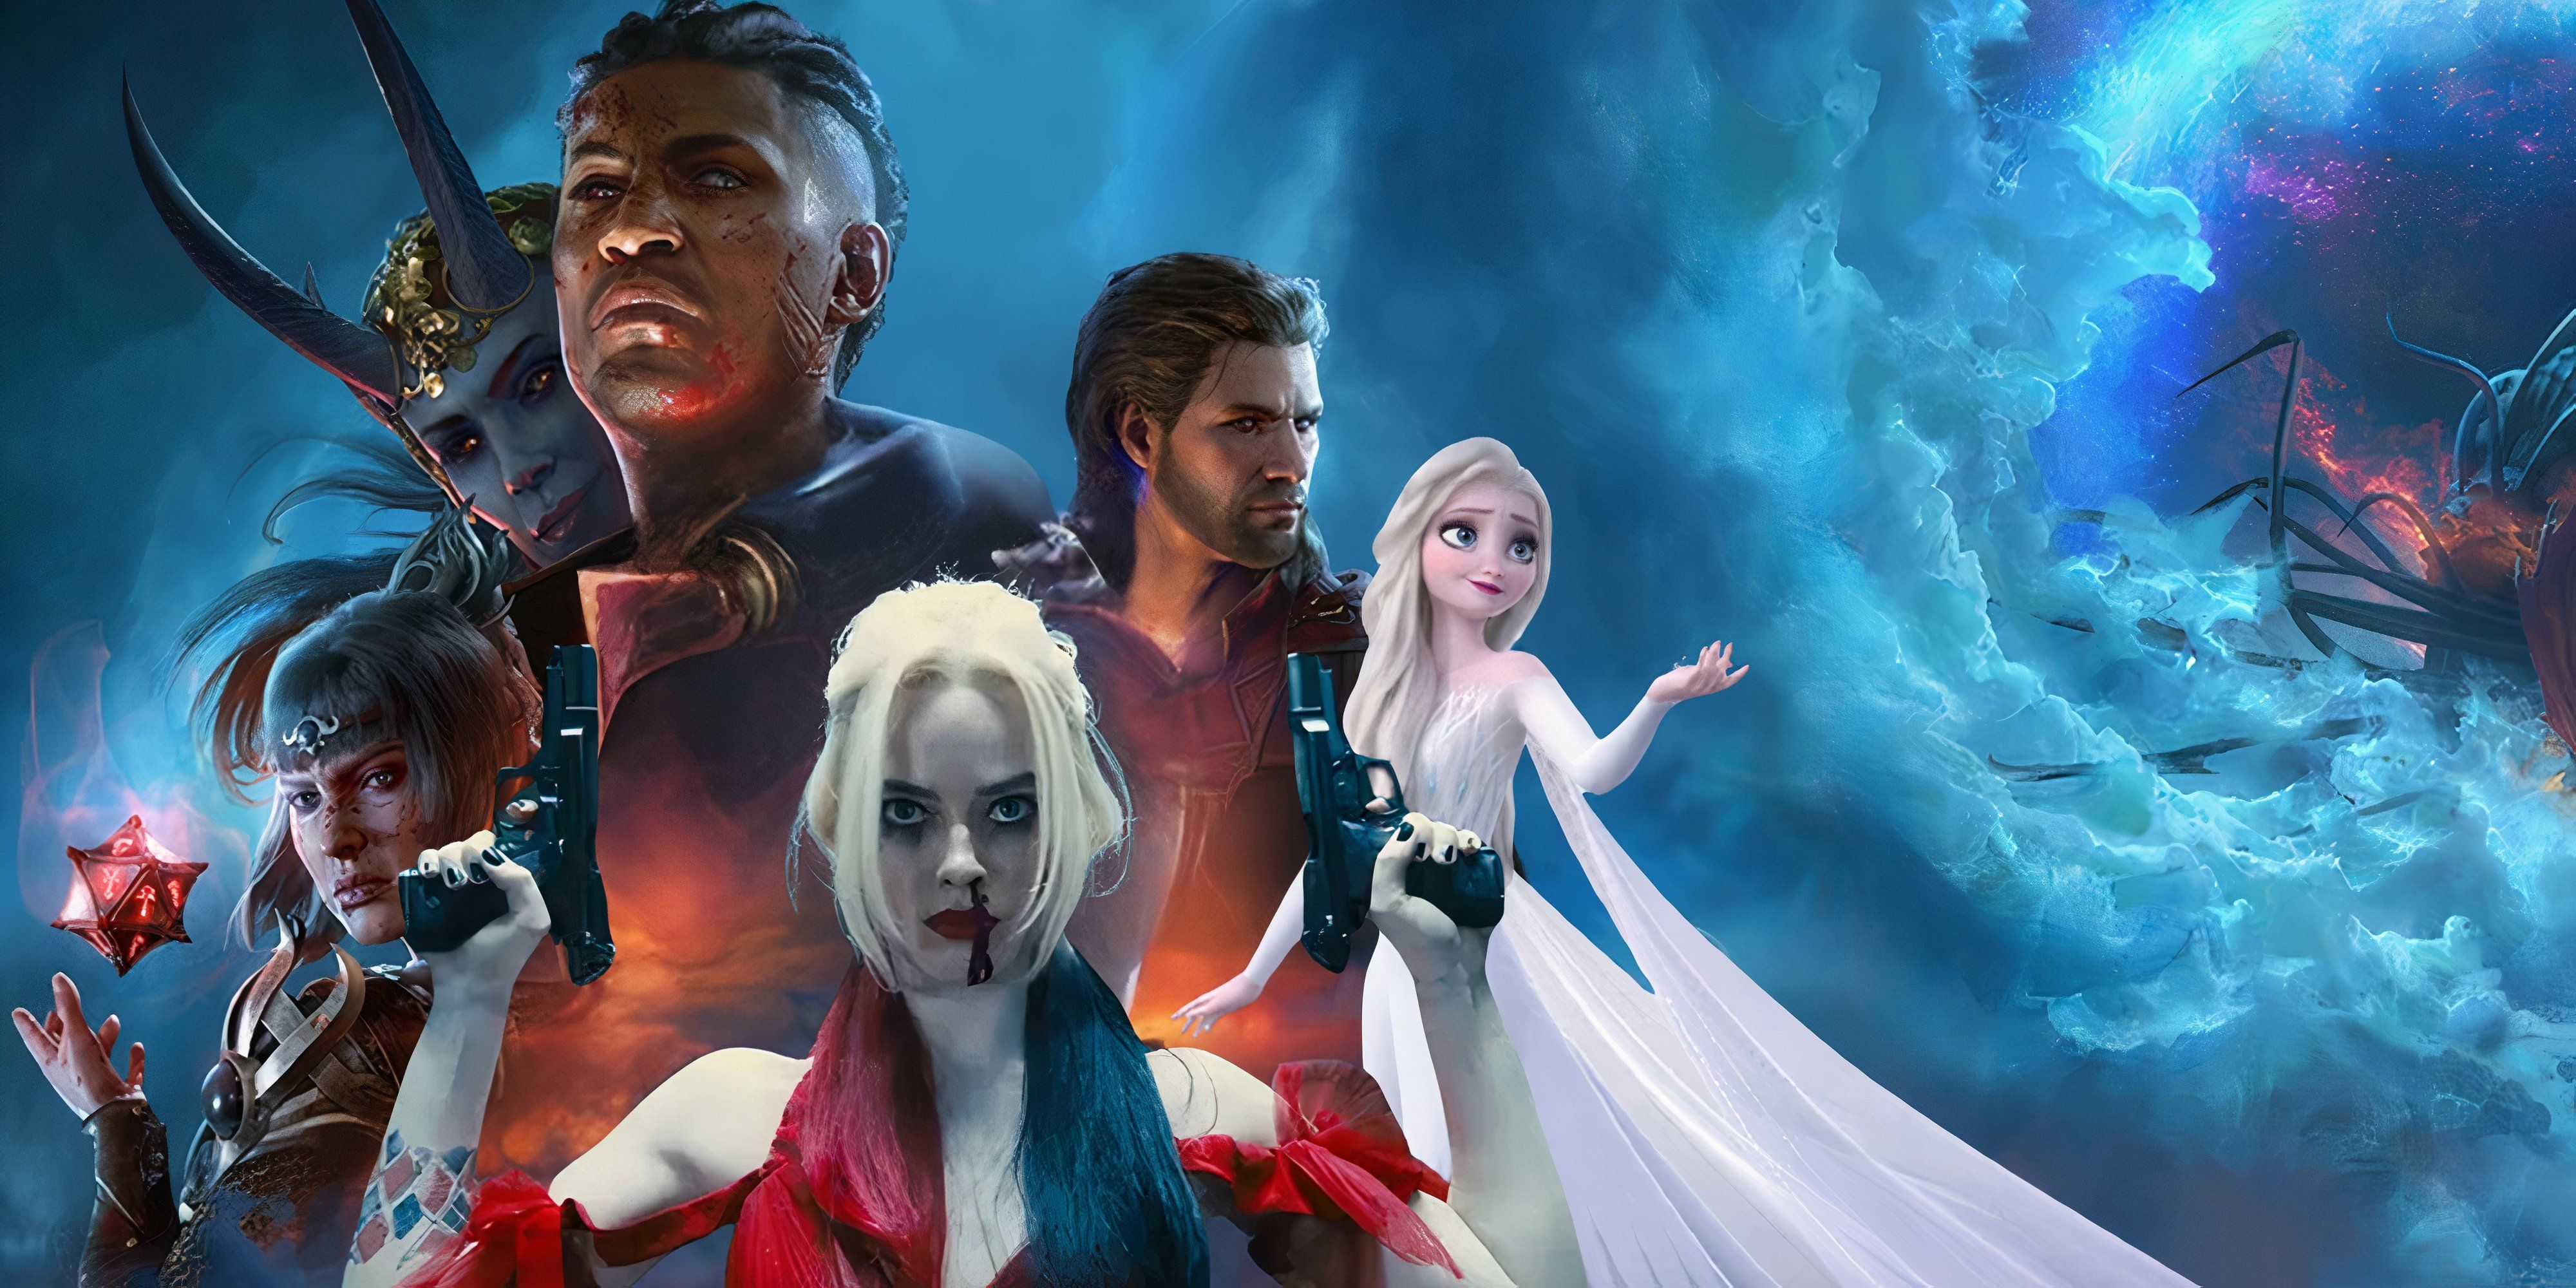 Harley Quinn and Elsa in the classic Baldur's Gate 3 key art in place of Astarion and Lae'zel